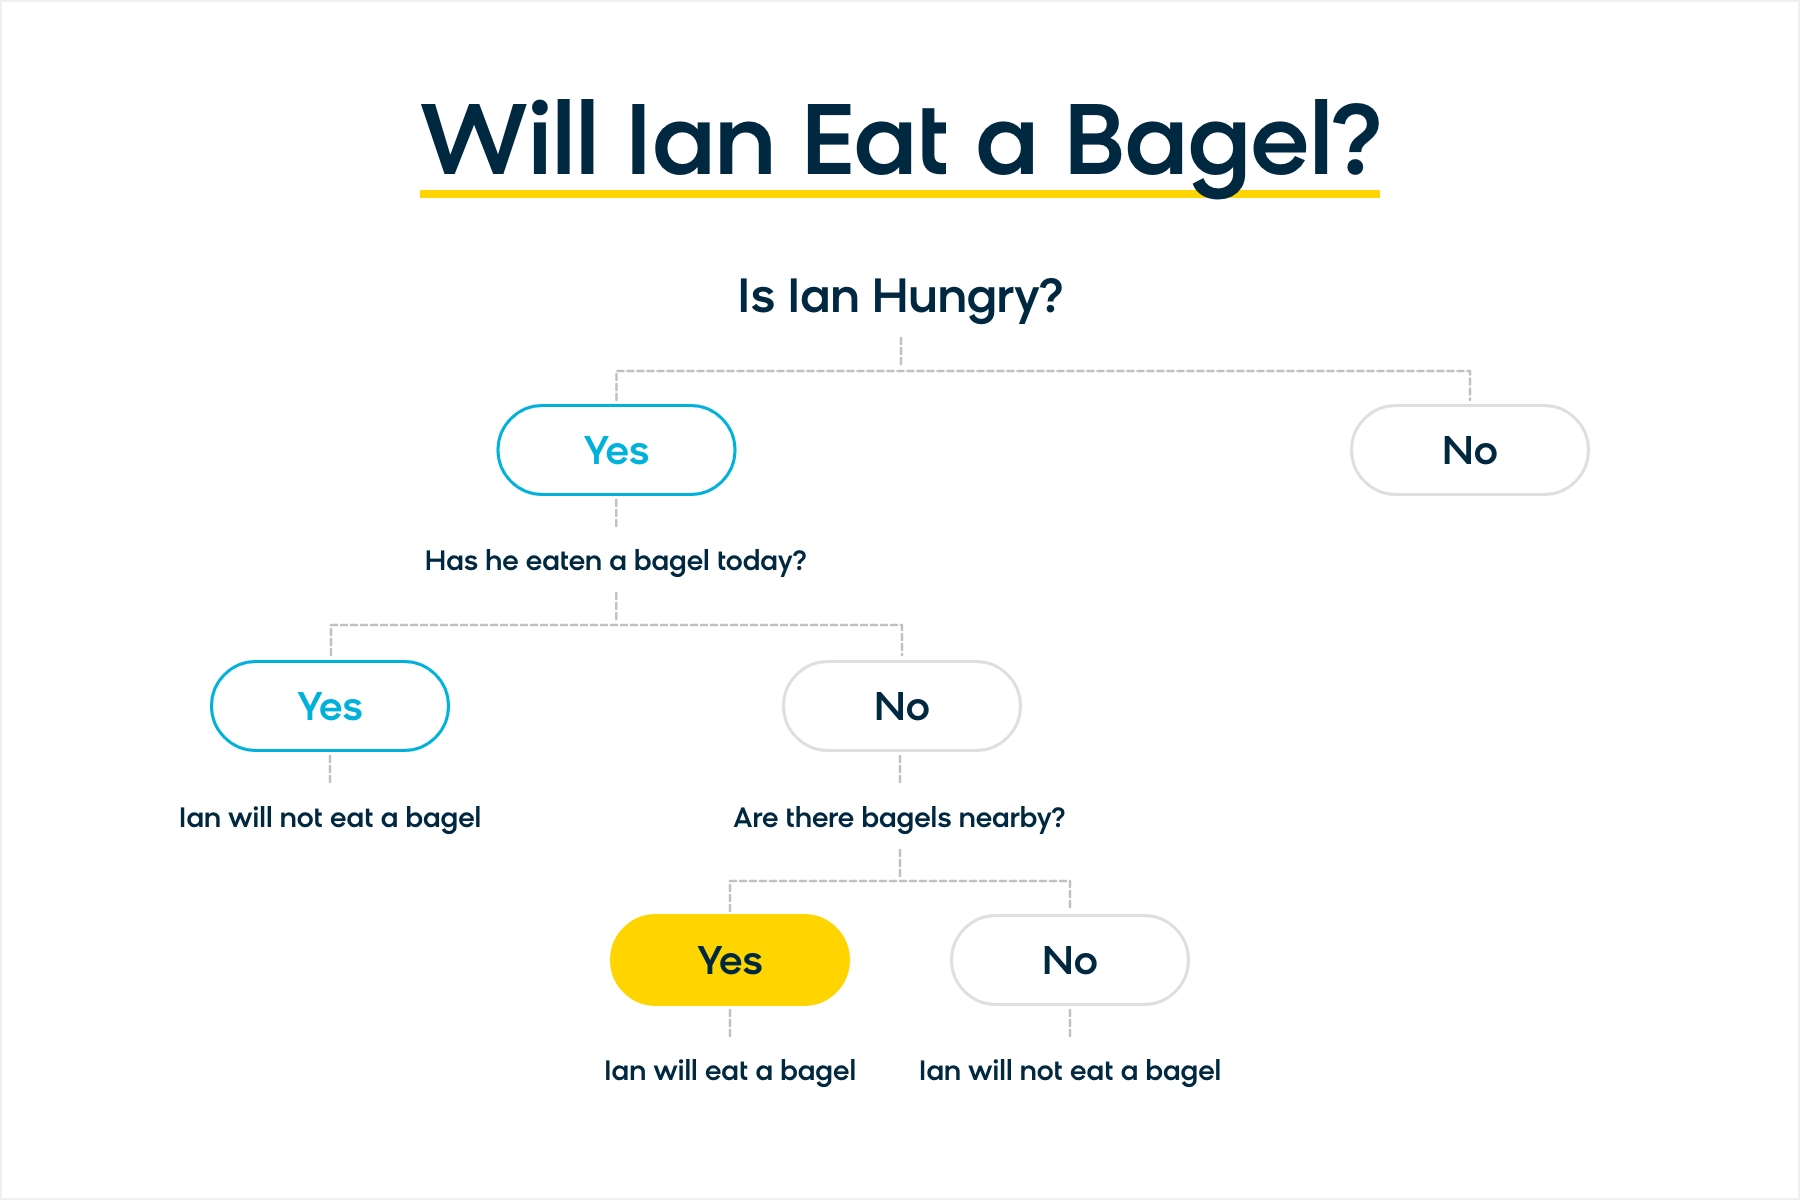 An example of a machine learning decision tree that predicts whether or not Ian is about to eat a bagel.